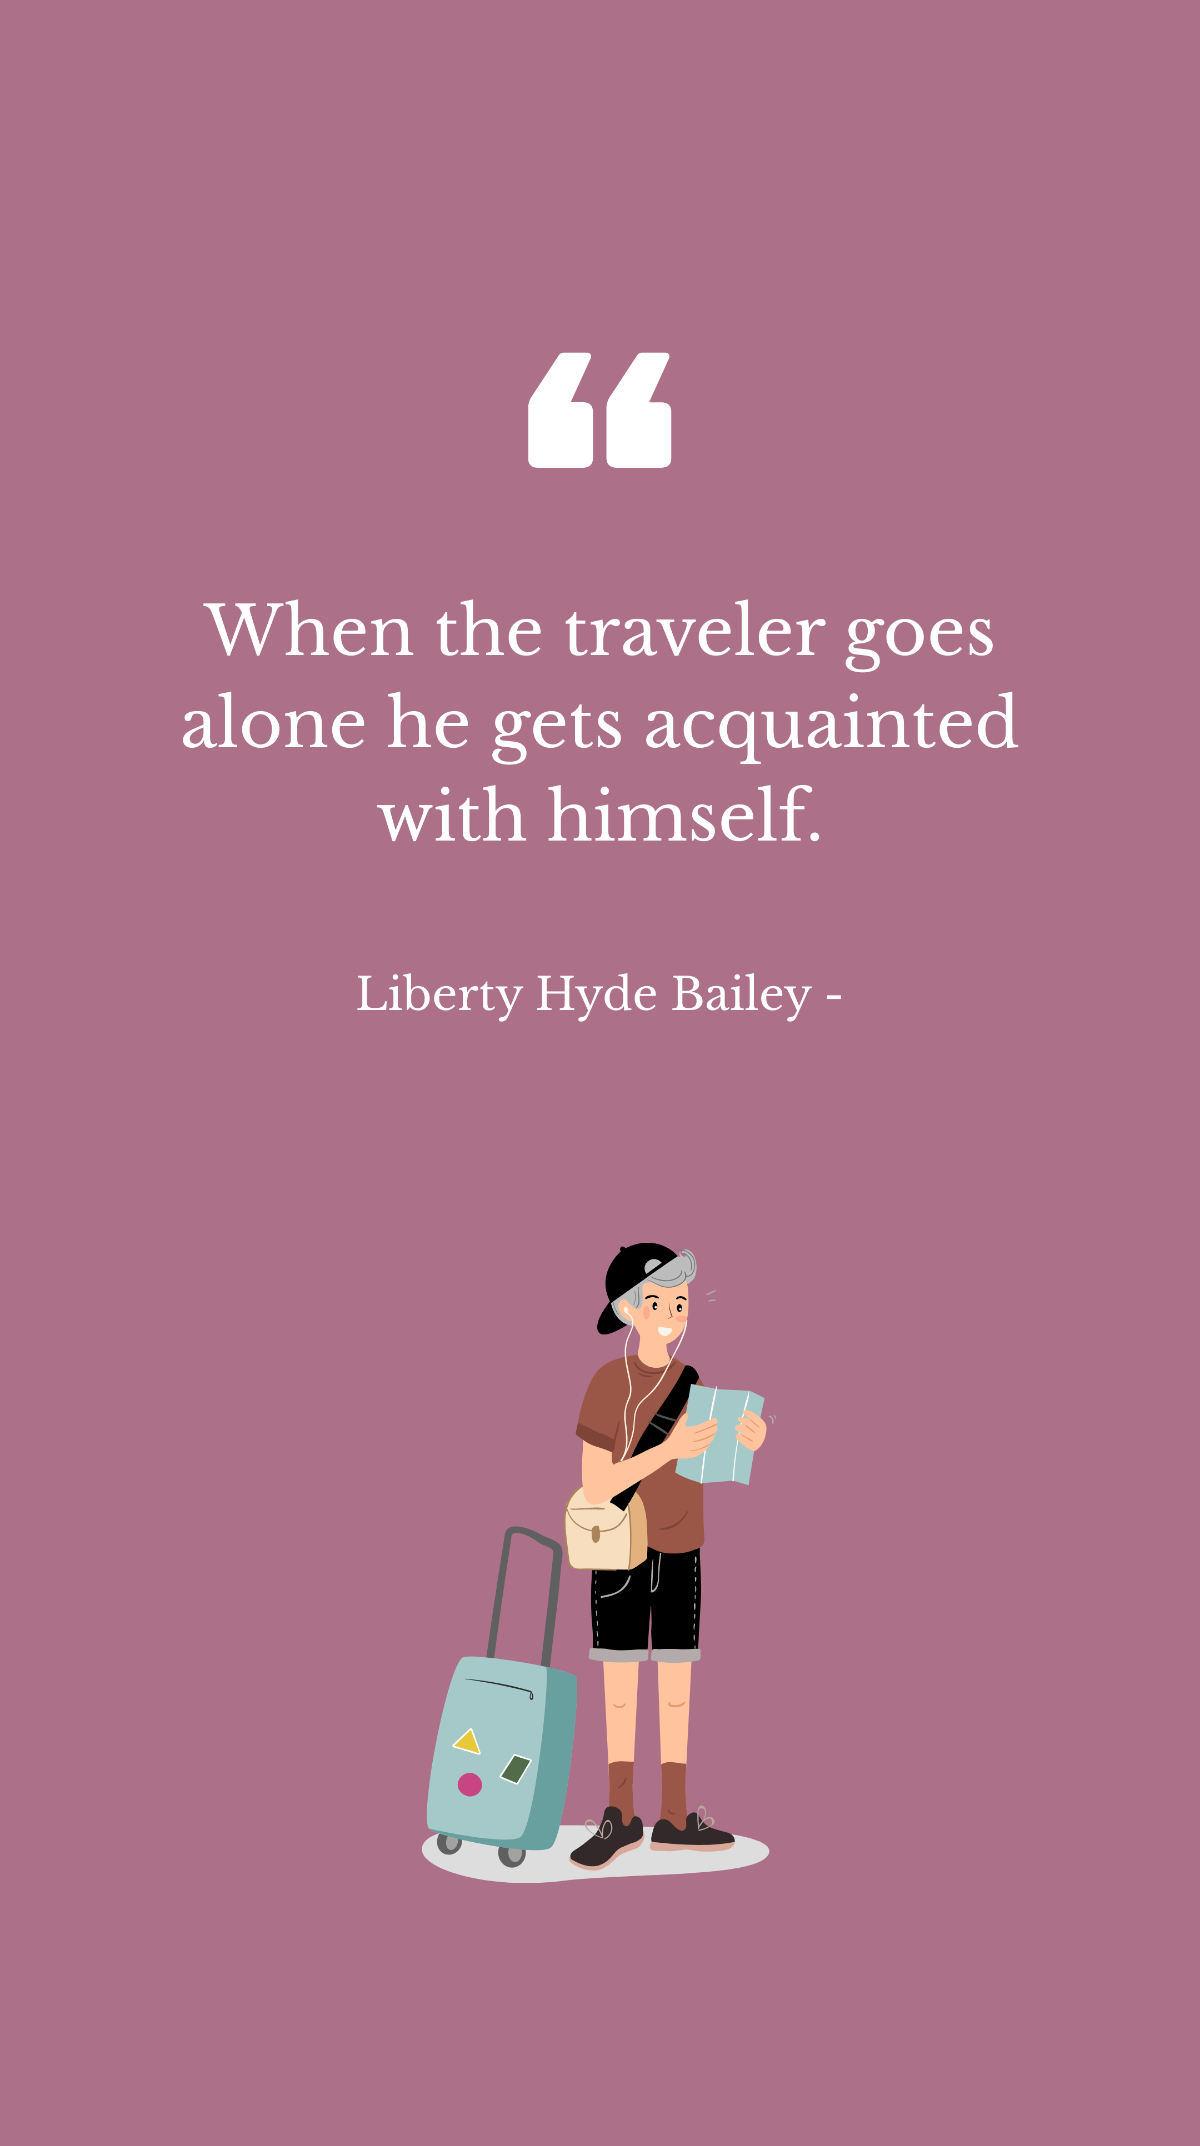 Liberty Hyde Bailey - When the traveler goes alone he gets acquainted with himself. Template